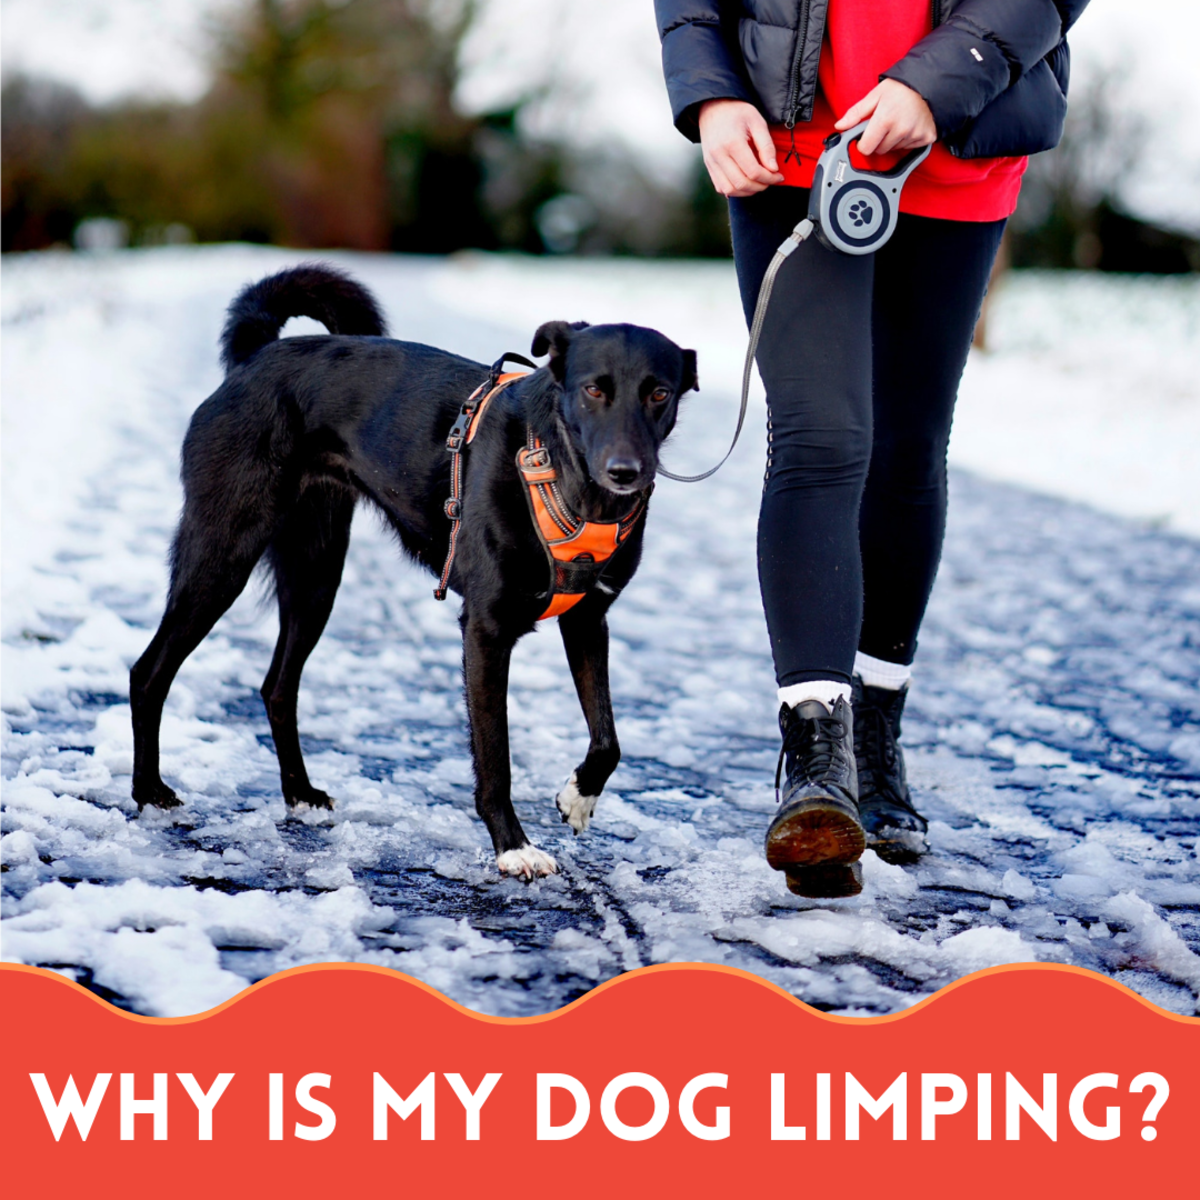 There are many possible reasons a dog may be limping. Some are more serious than others. 